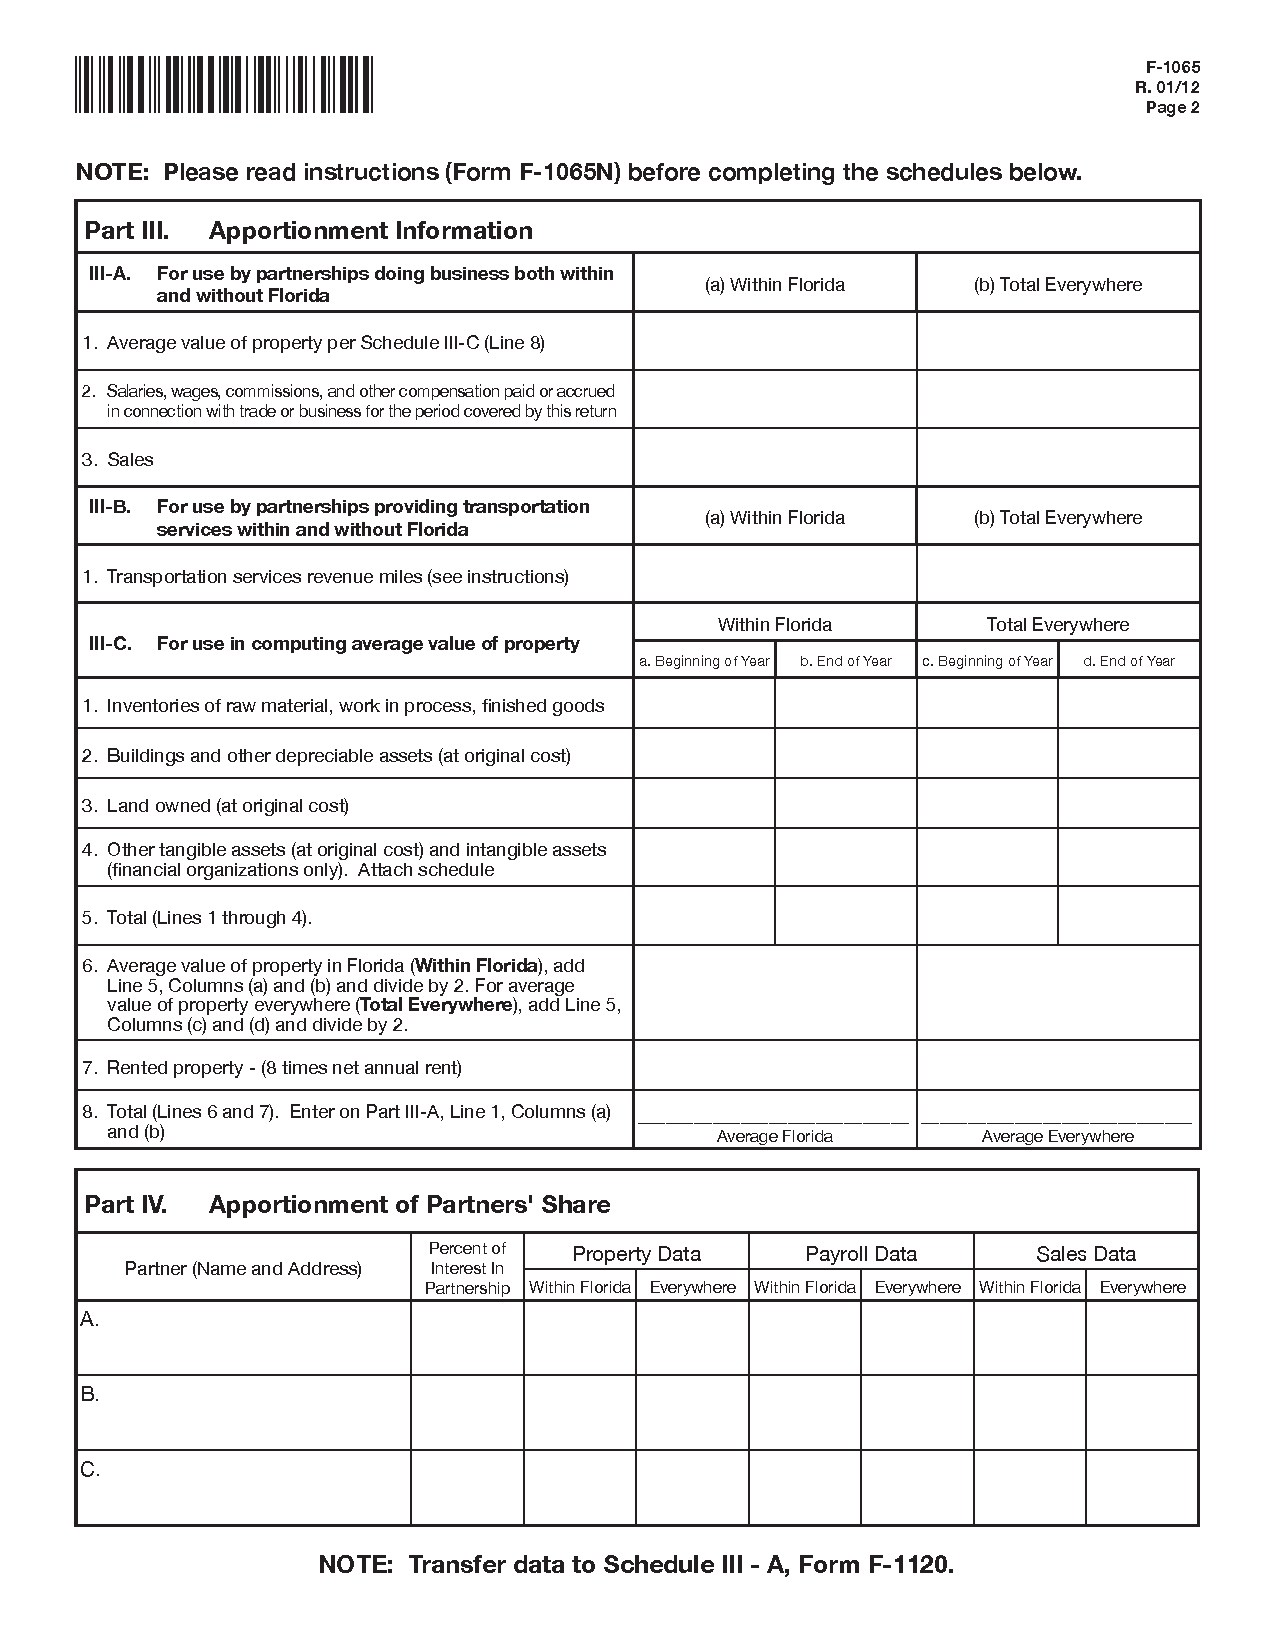 florida government travel tax exempt form